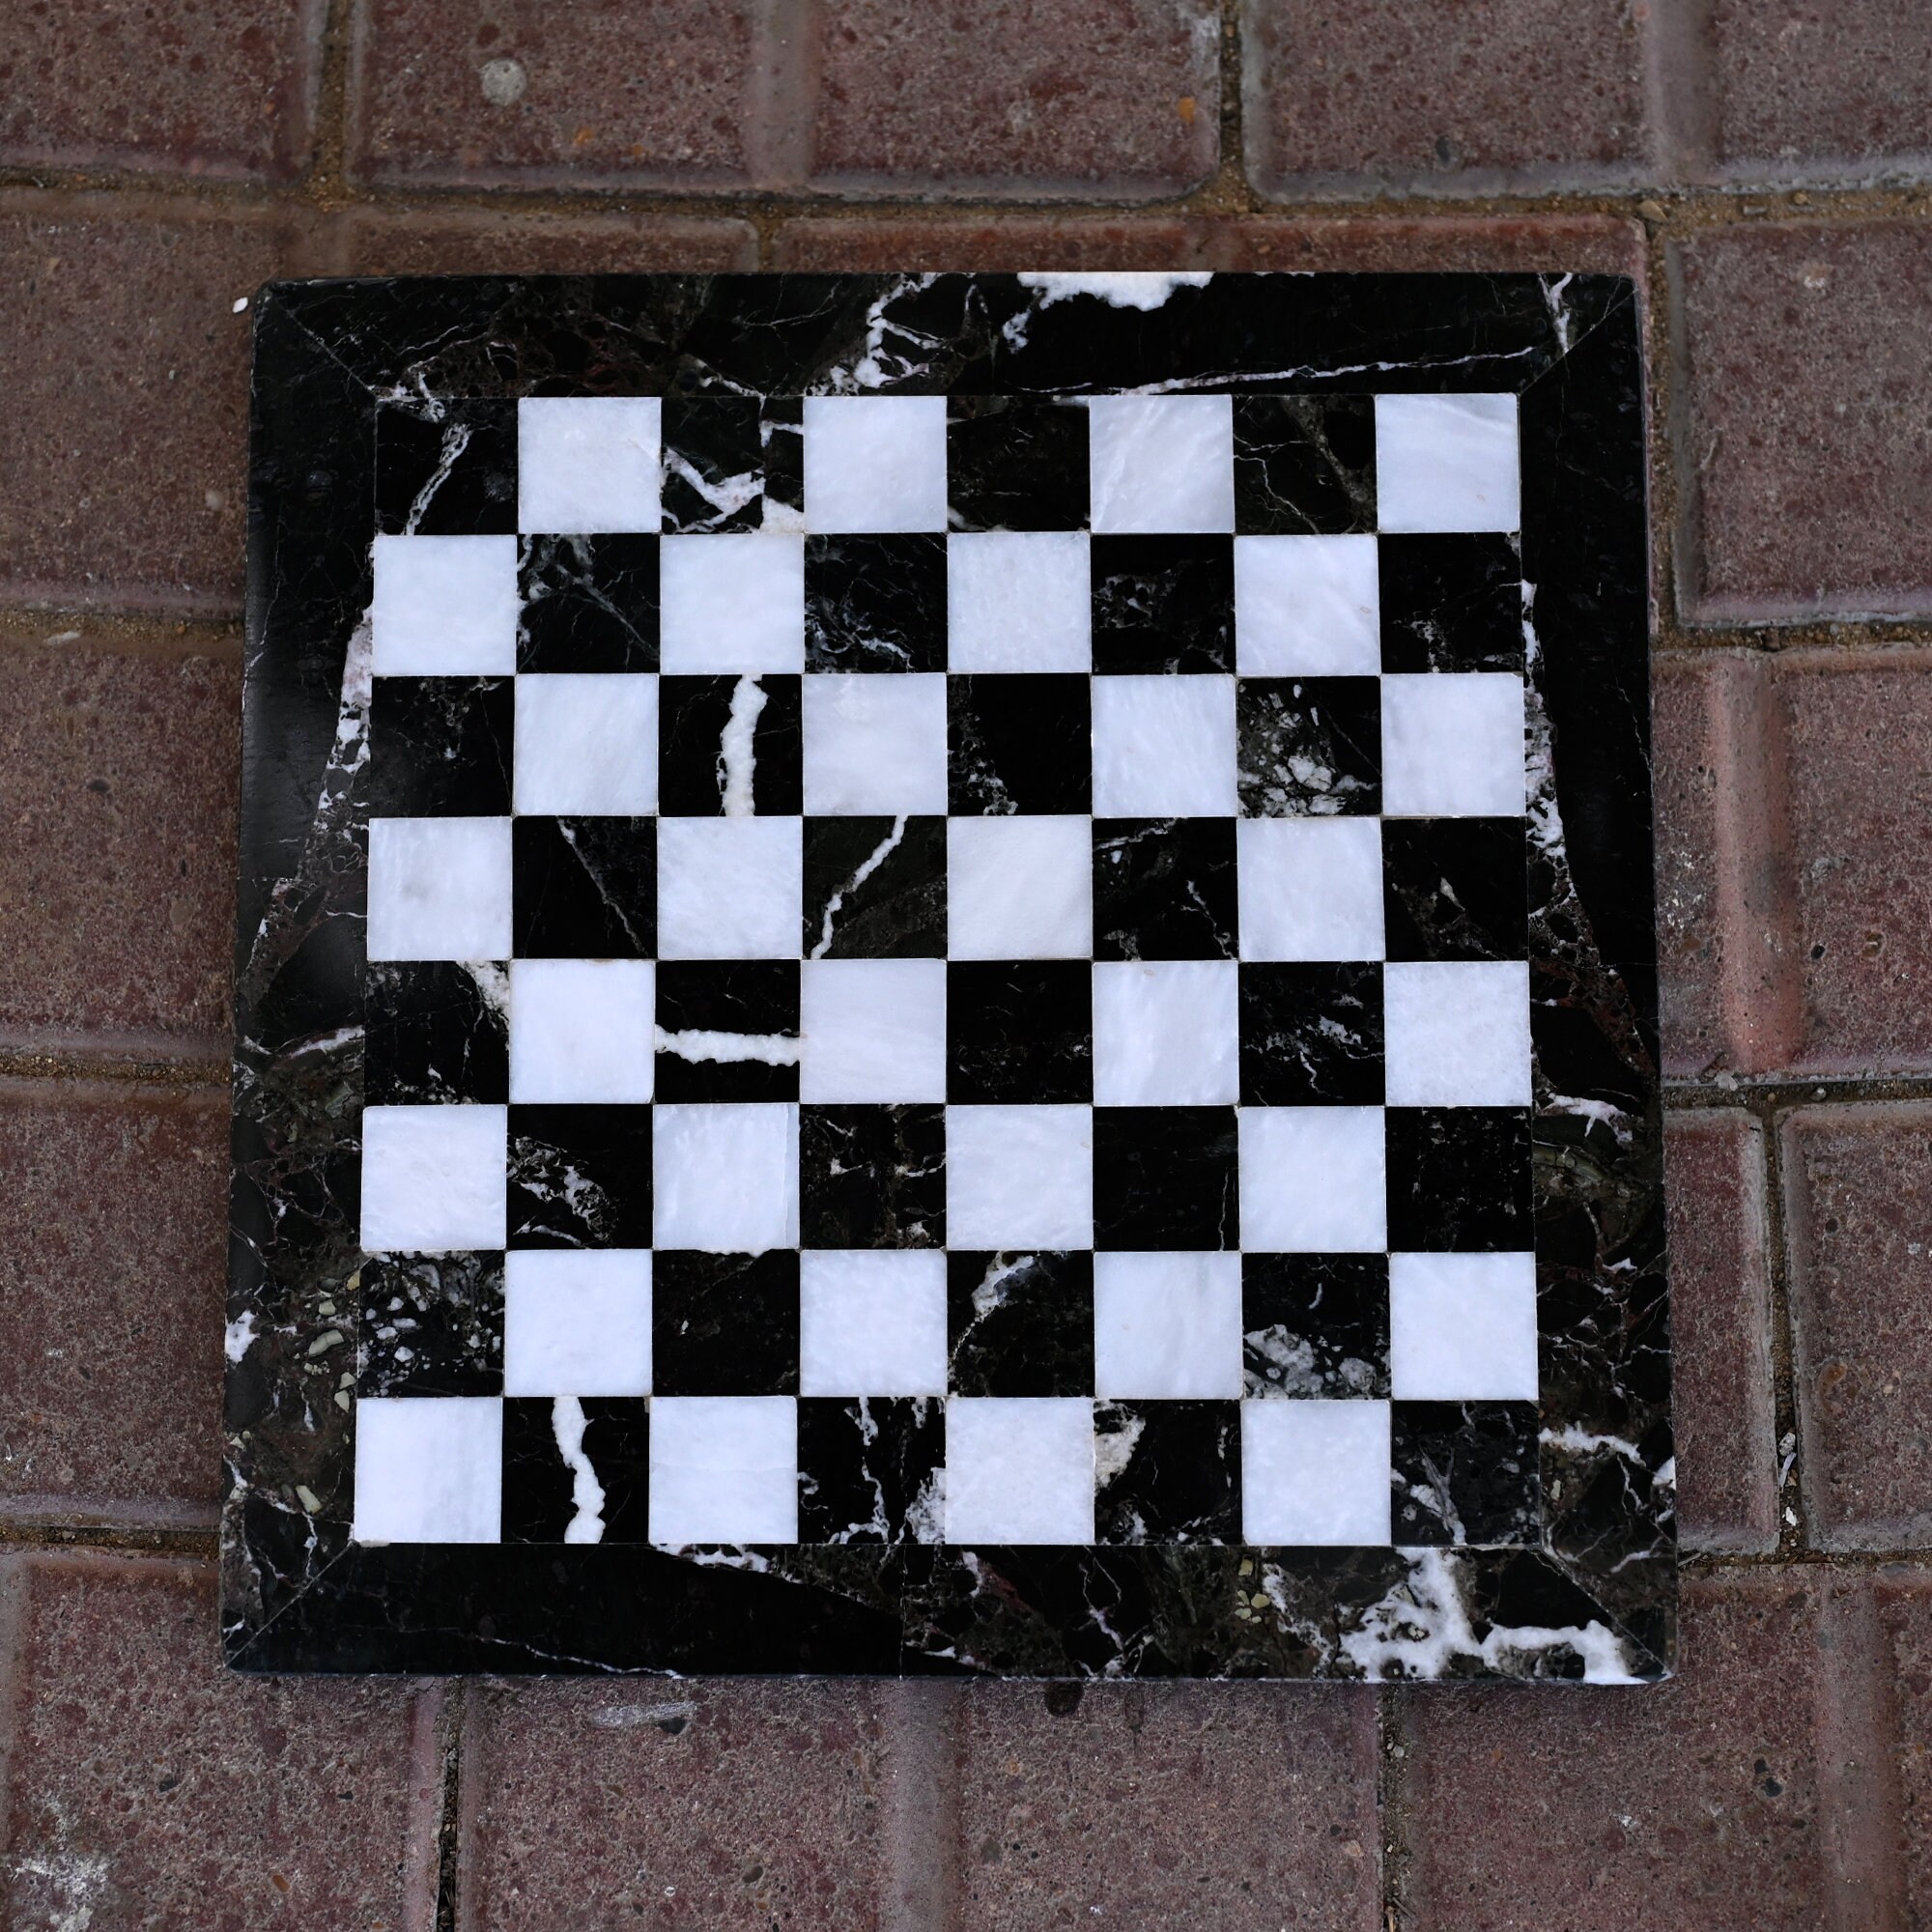 The Zebra - Black Marble and White Onyx with Marble Board